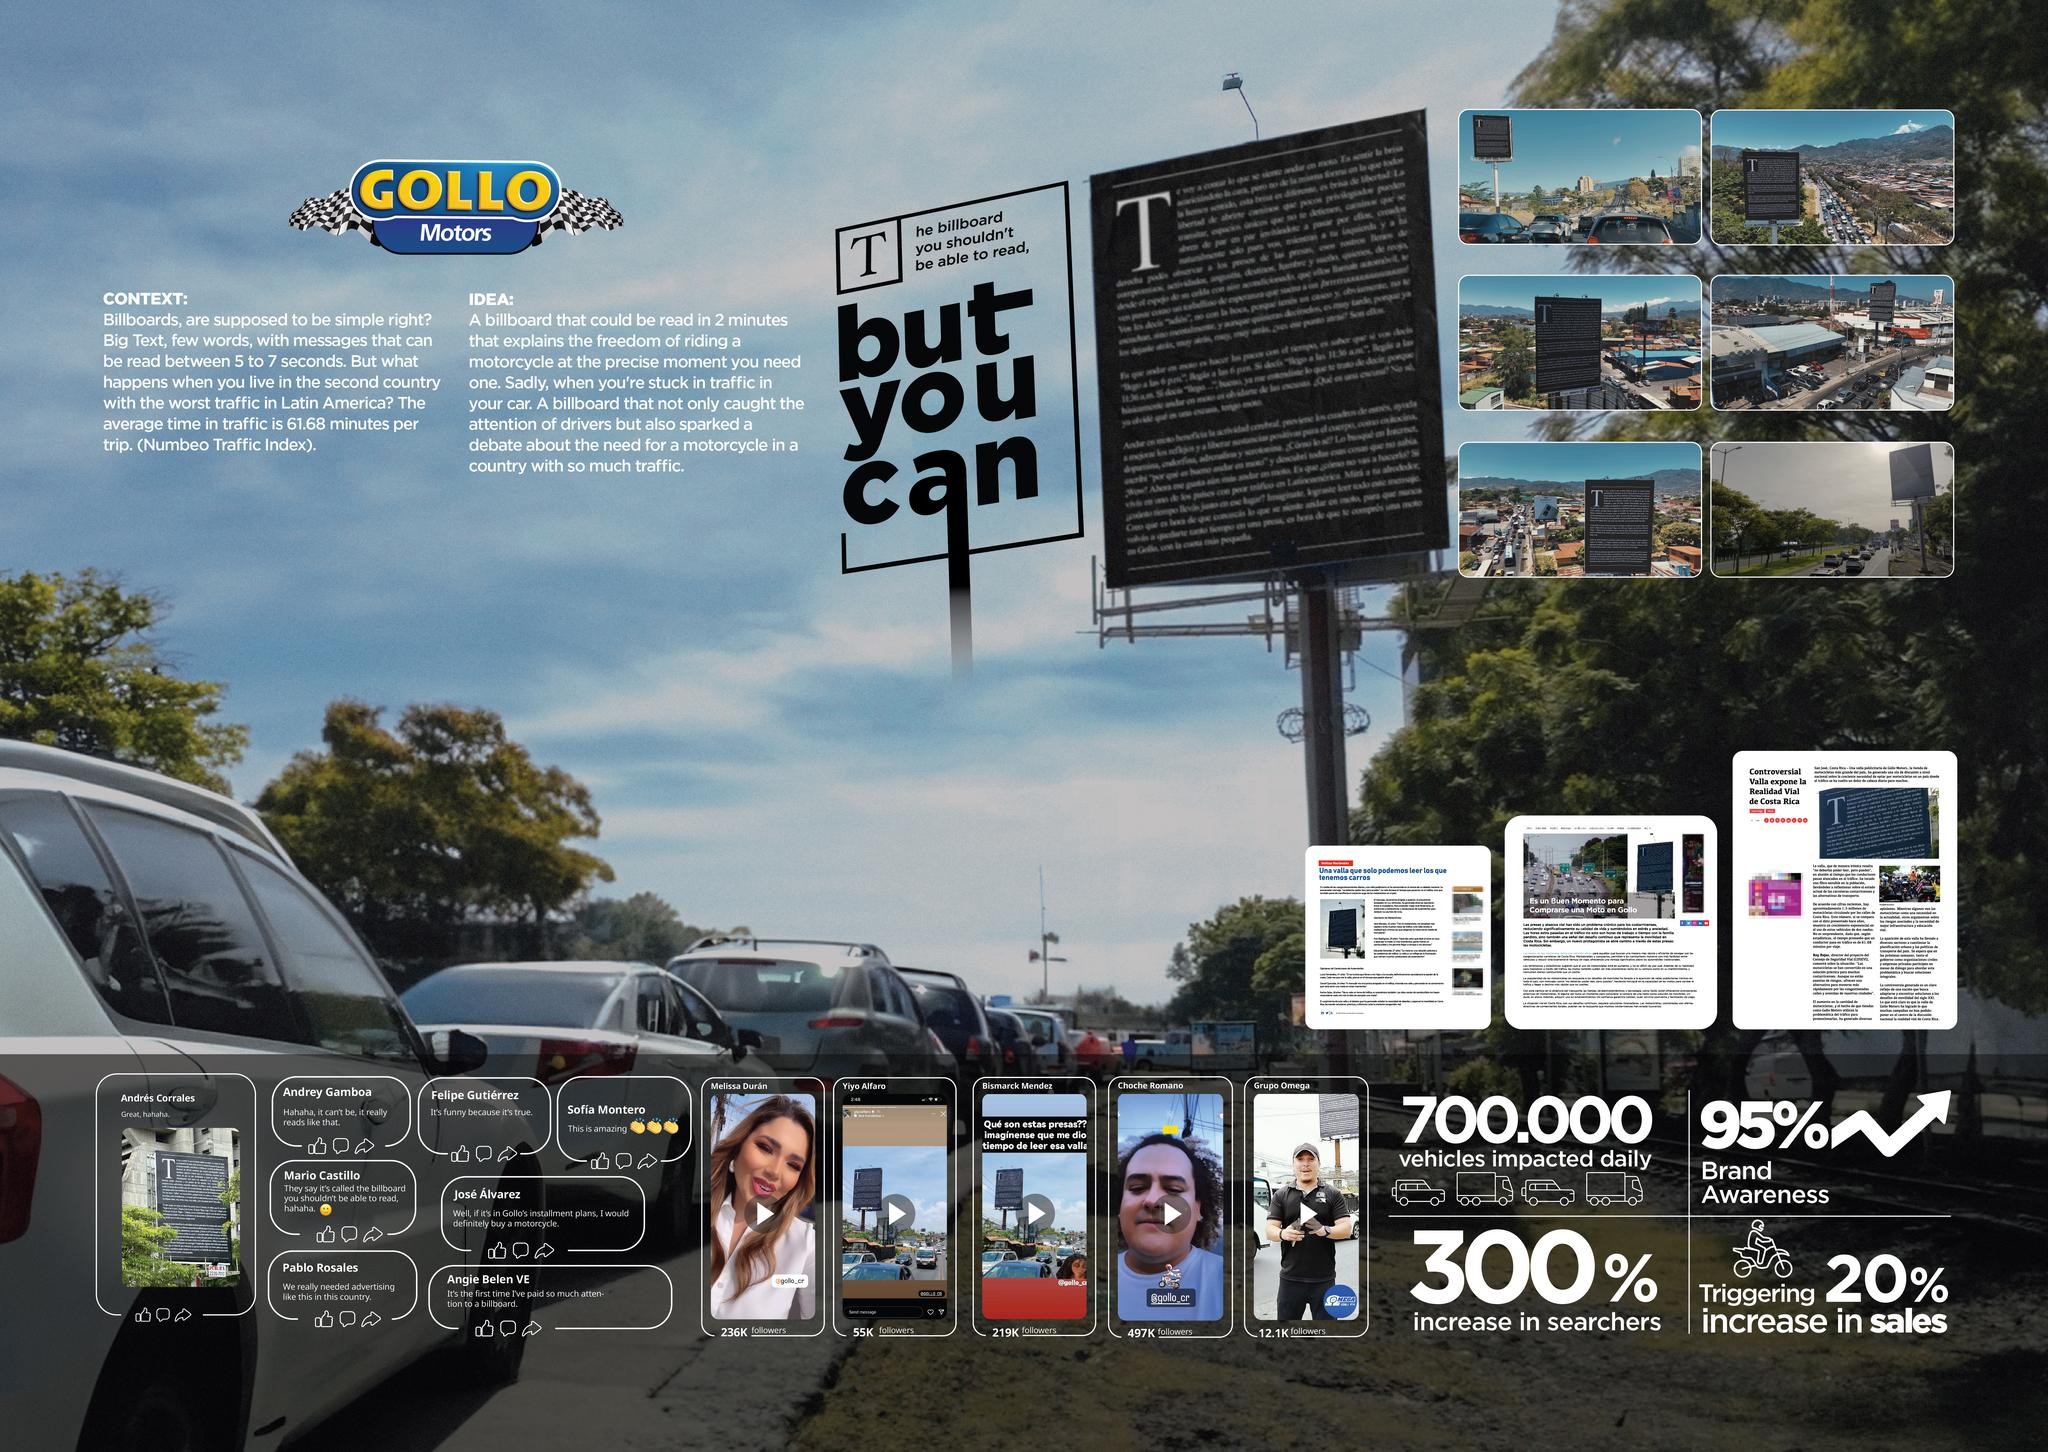 The billboard you shouldn't be able to read but you can